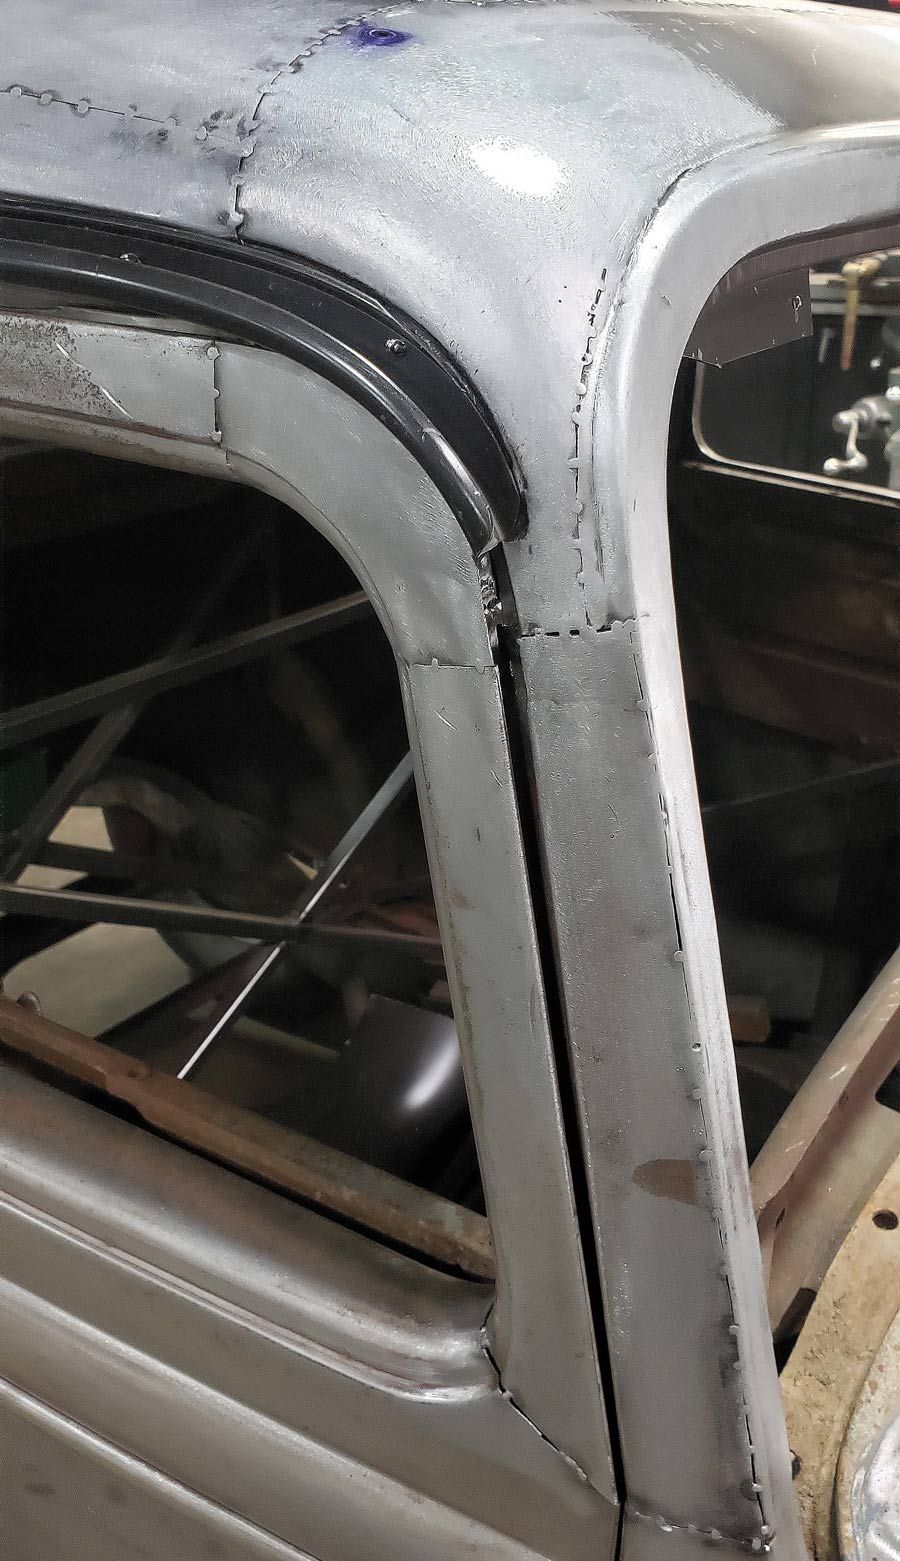 All the pieces of the door, A post, and driprail are in their  final spots. As small as this section of the car is, this was probably the hardest area to get right.  